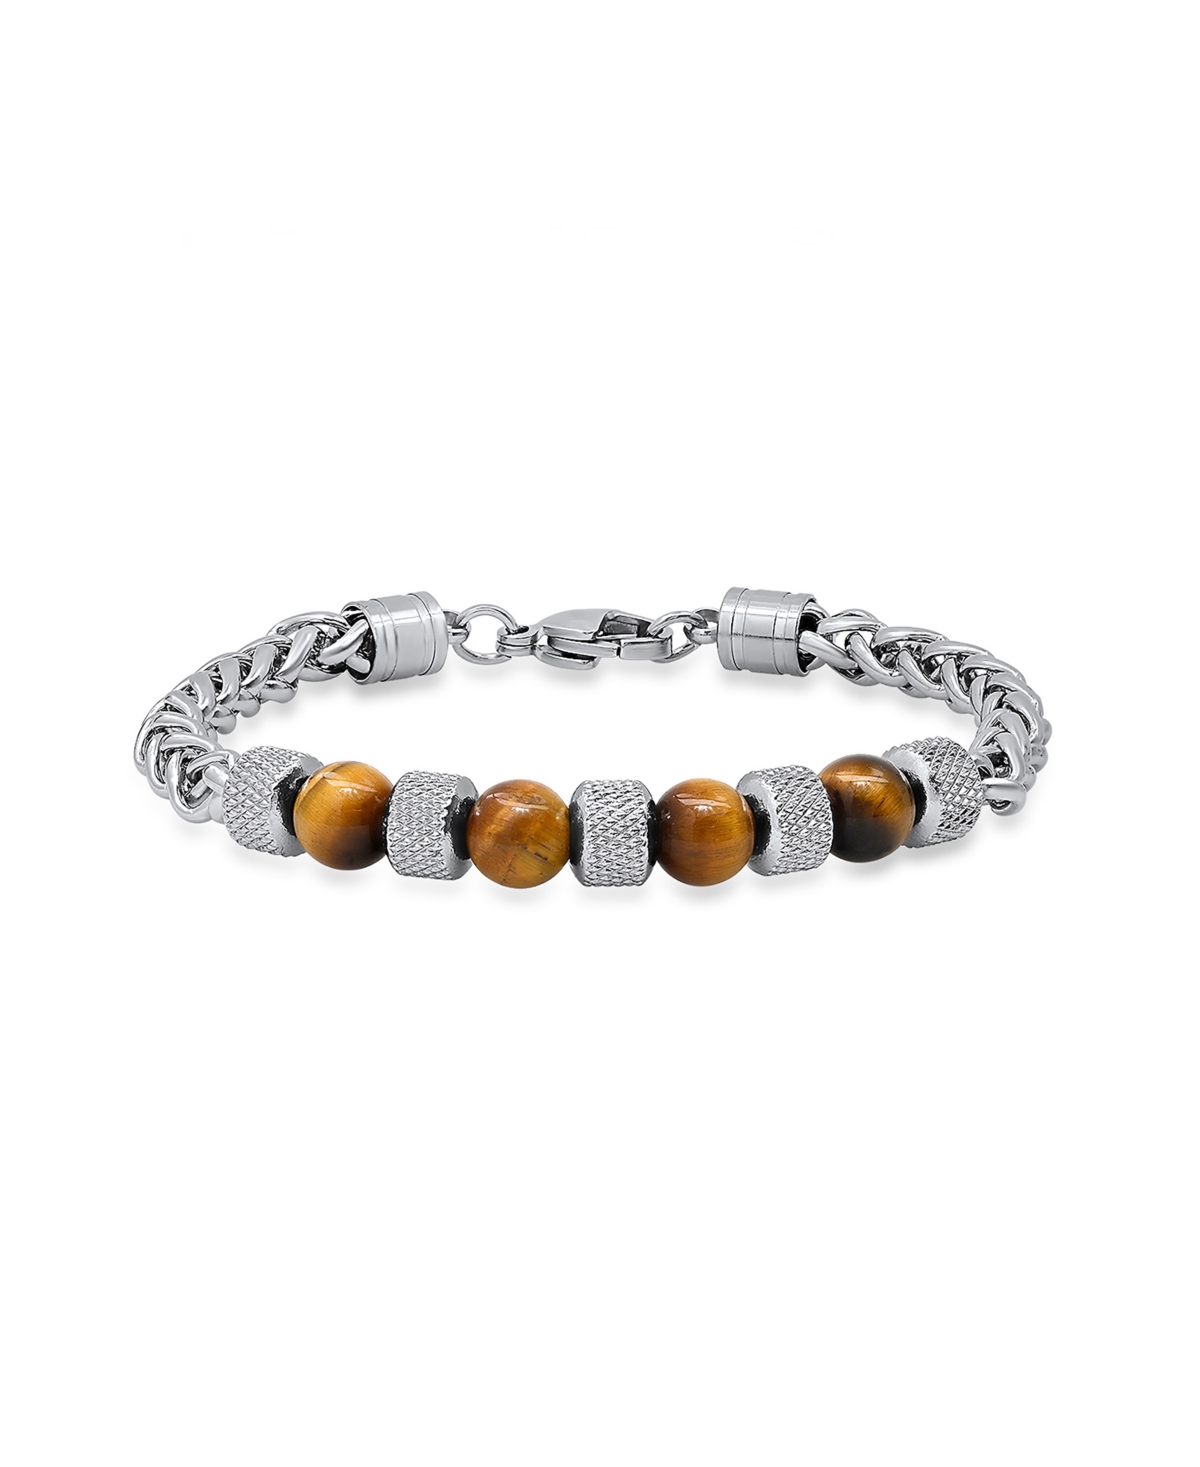 Men's Stainless Steel Wheat Chain and Tiger Eye Beads Bracelet - Silver-tone